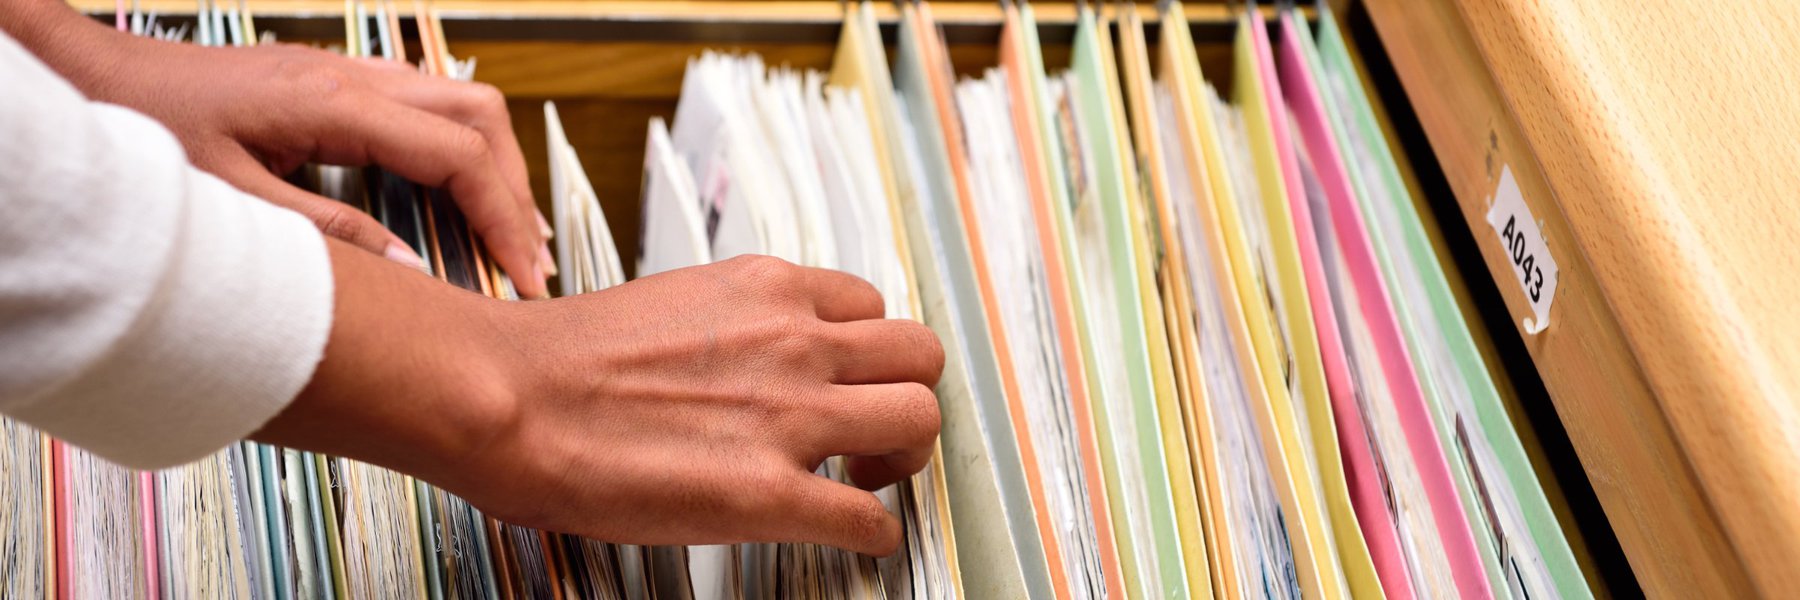 Hands are reviewing colorful files inside a filing cabinet.